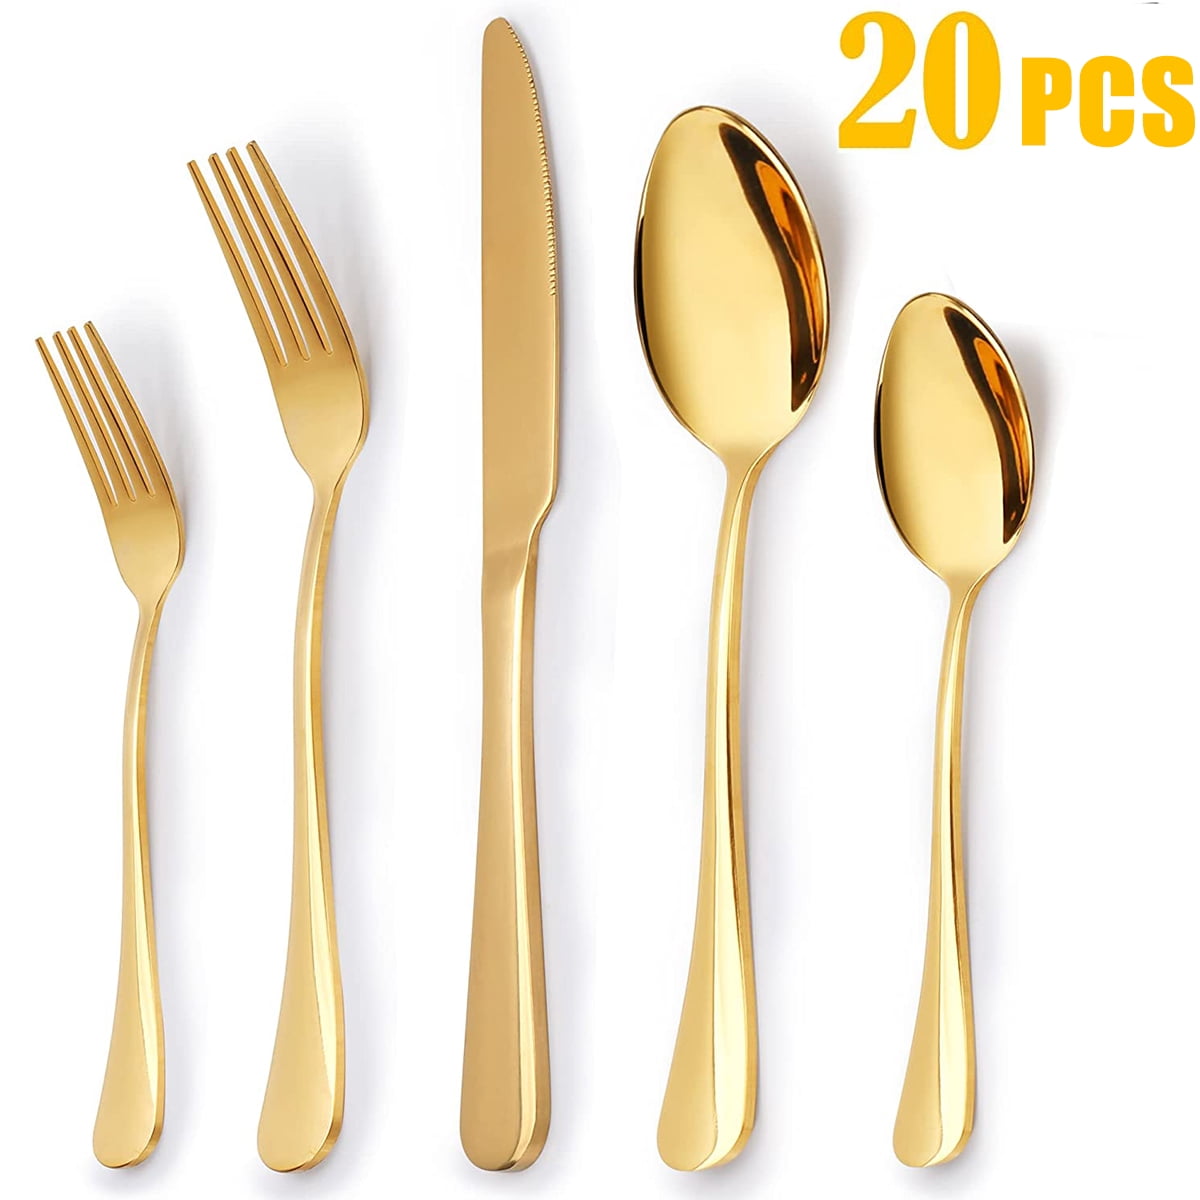 Buyer Star 12 Pieces Fish Fork Set Gold Stainless Steel Cutlery Set Serving for Home Kitchen and Restaurant Mirror Polshed Dinnerware 